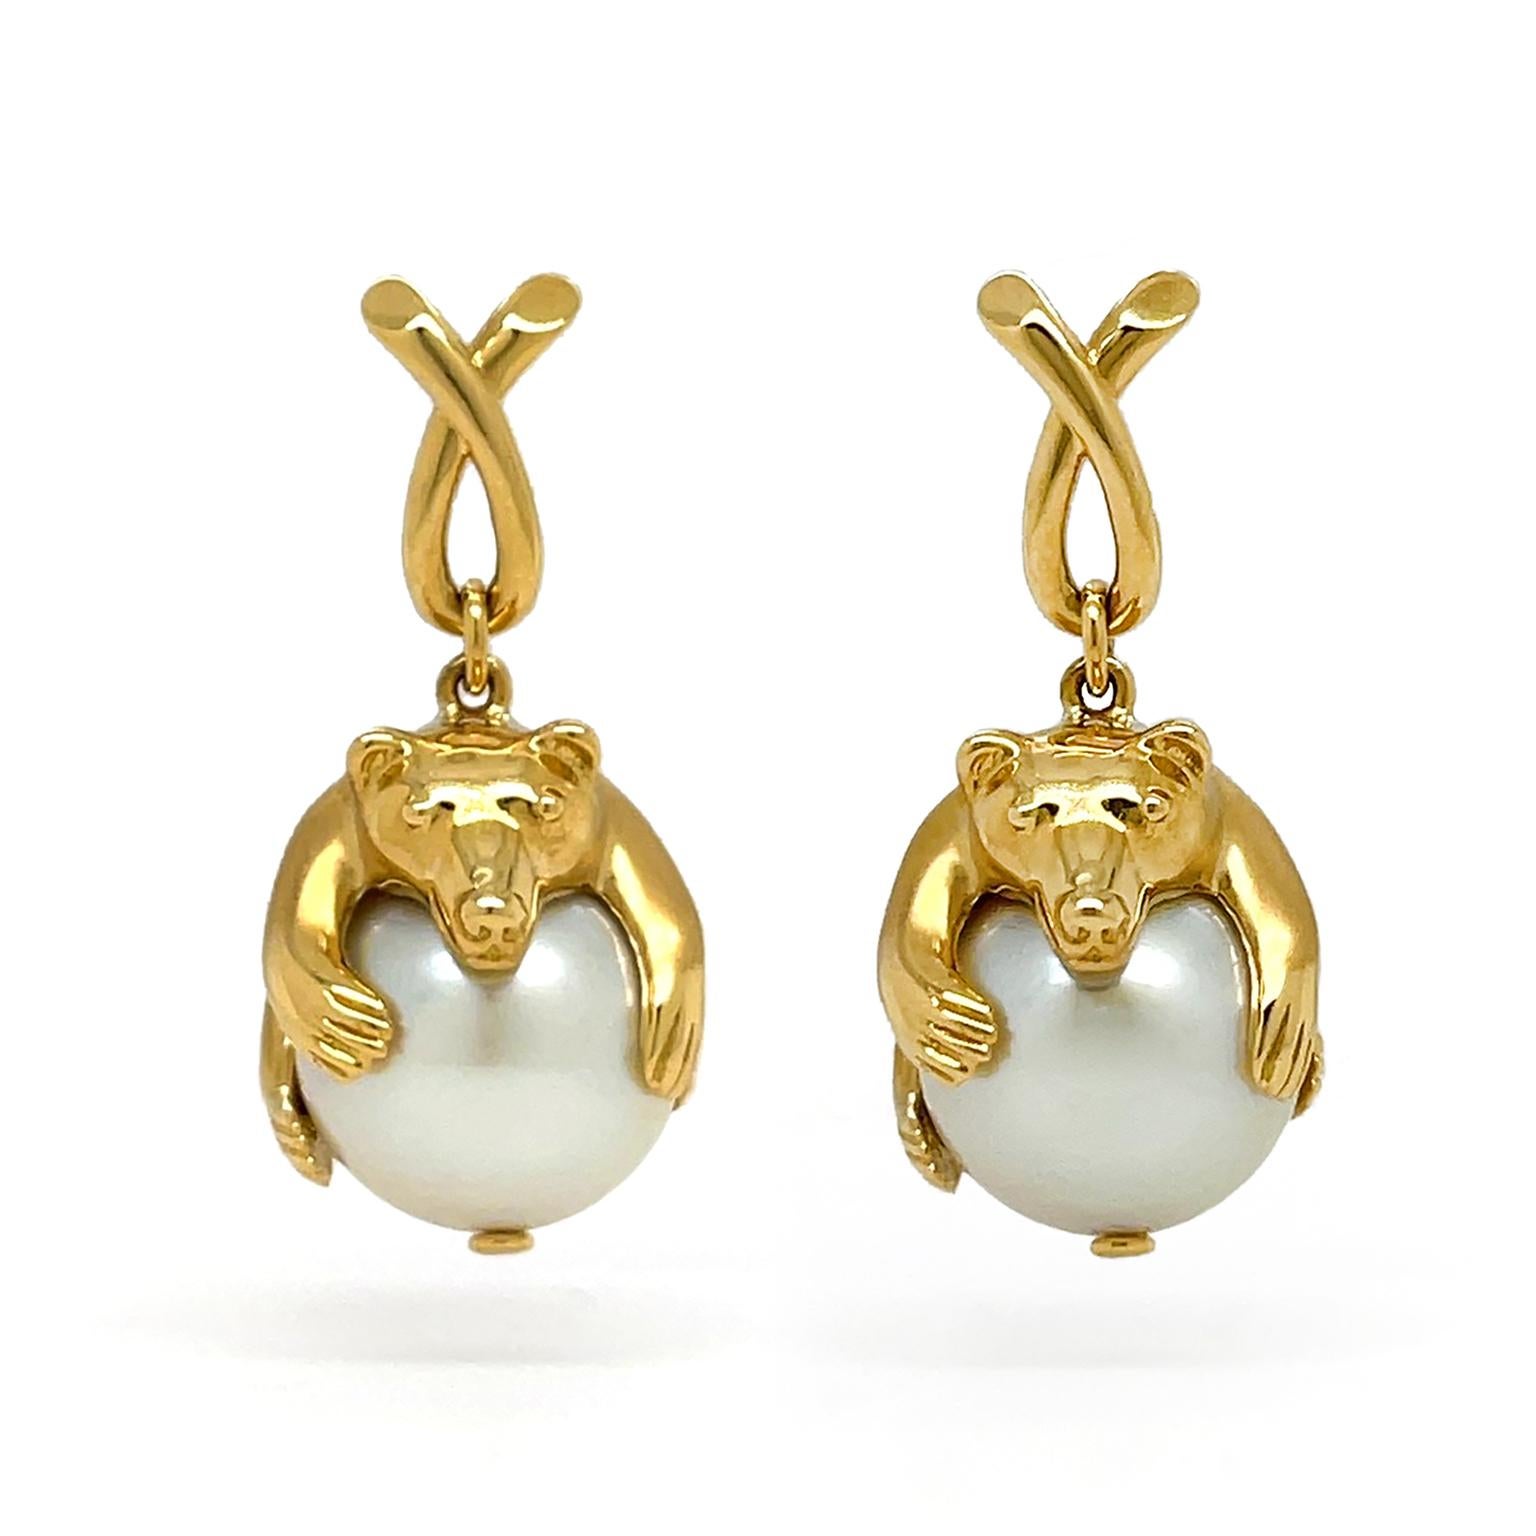 Descending from a folded loop, these polished 18k yellow gold polar bears are a unique update to classic pearl earrings. Craftsmanship includes detailed carving of the paws and eyes. The polar bears relax on top of a south sea pearl, giving the